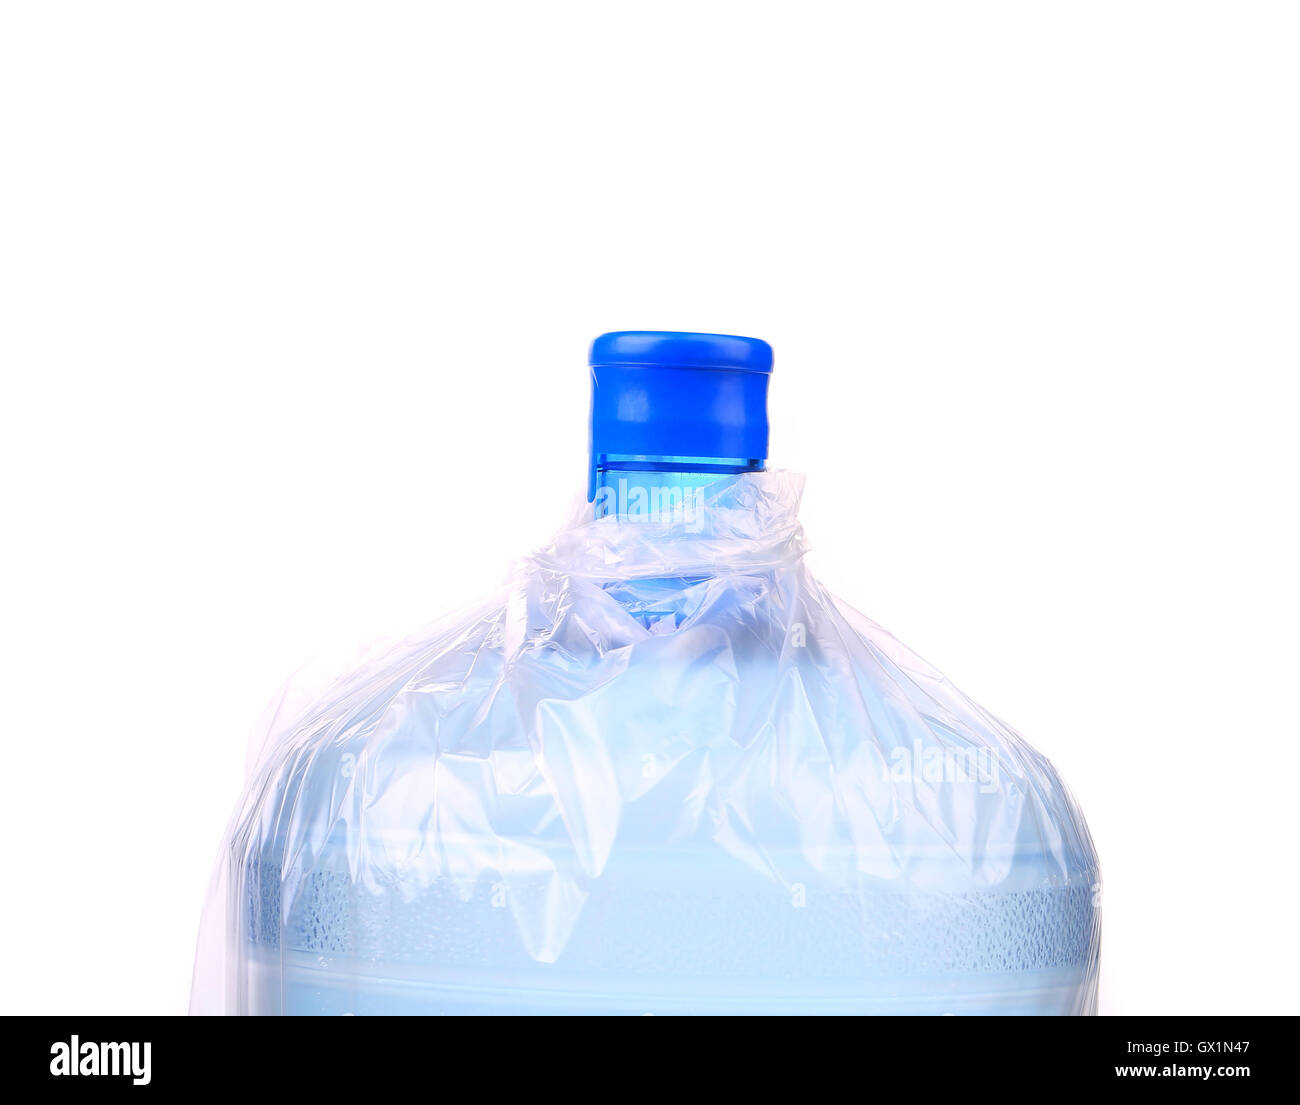 Download Water Cooler Bottle High Resolution Stock Photography And Images Alamy Yellowimages Mockups